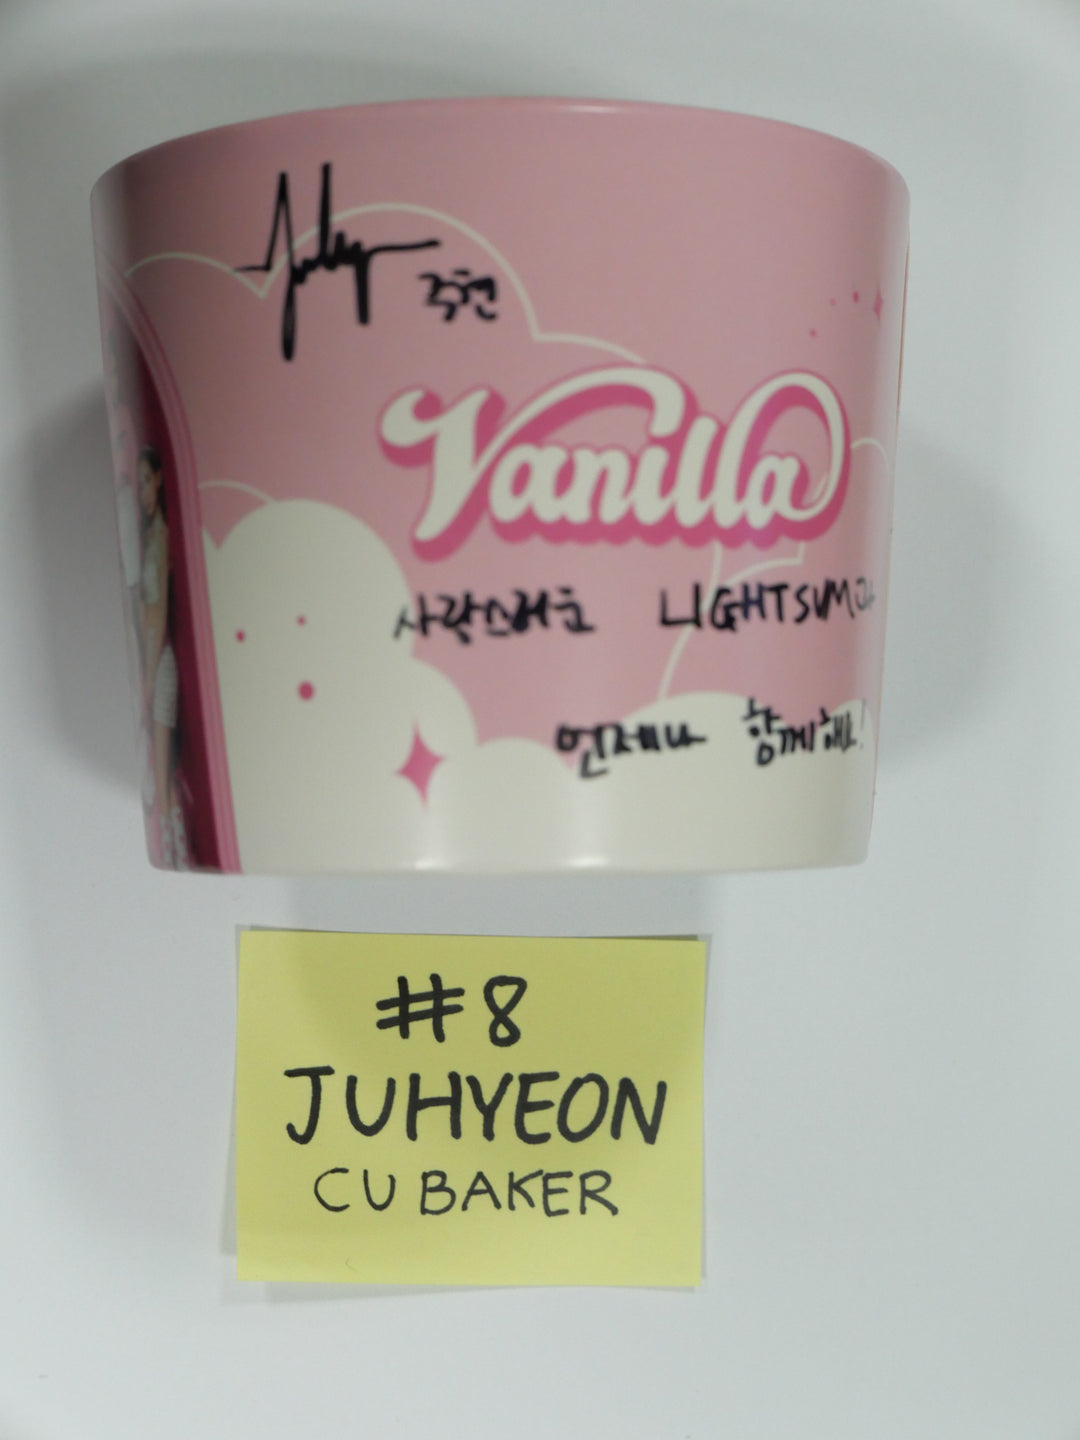 Lightsum - CUBAKER Event Hand Autograpted Cup Holder & Photocard